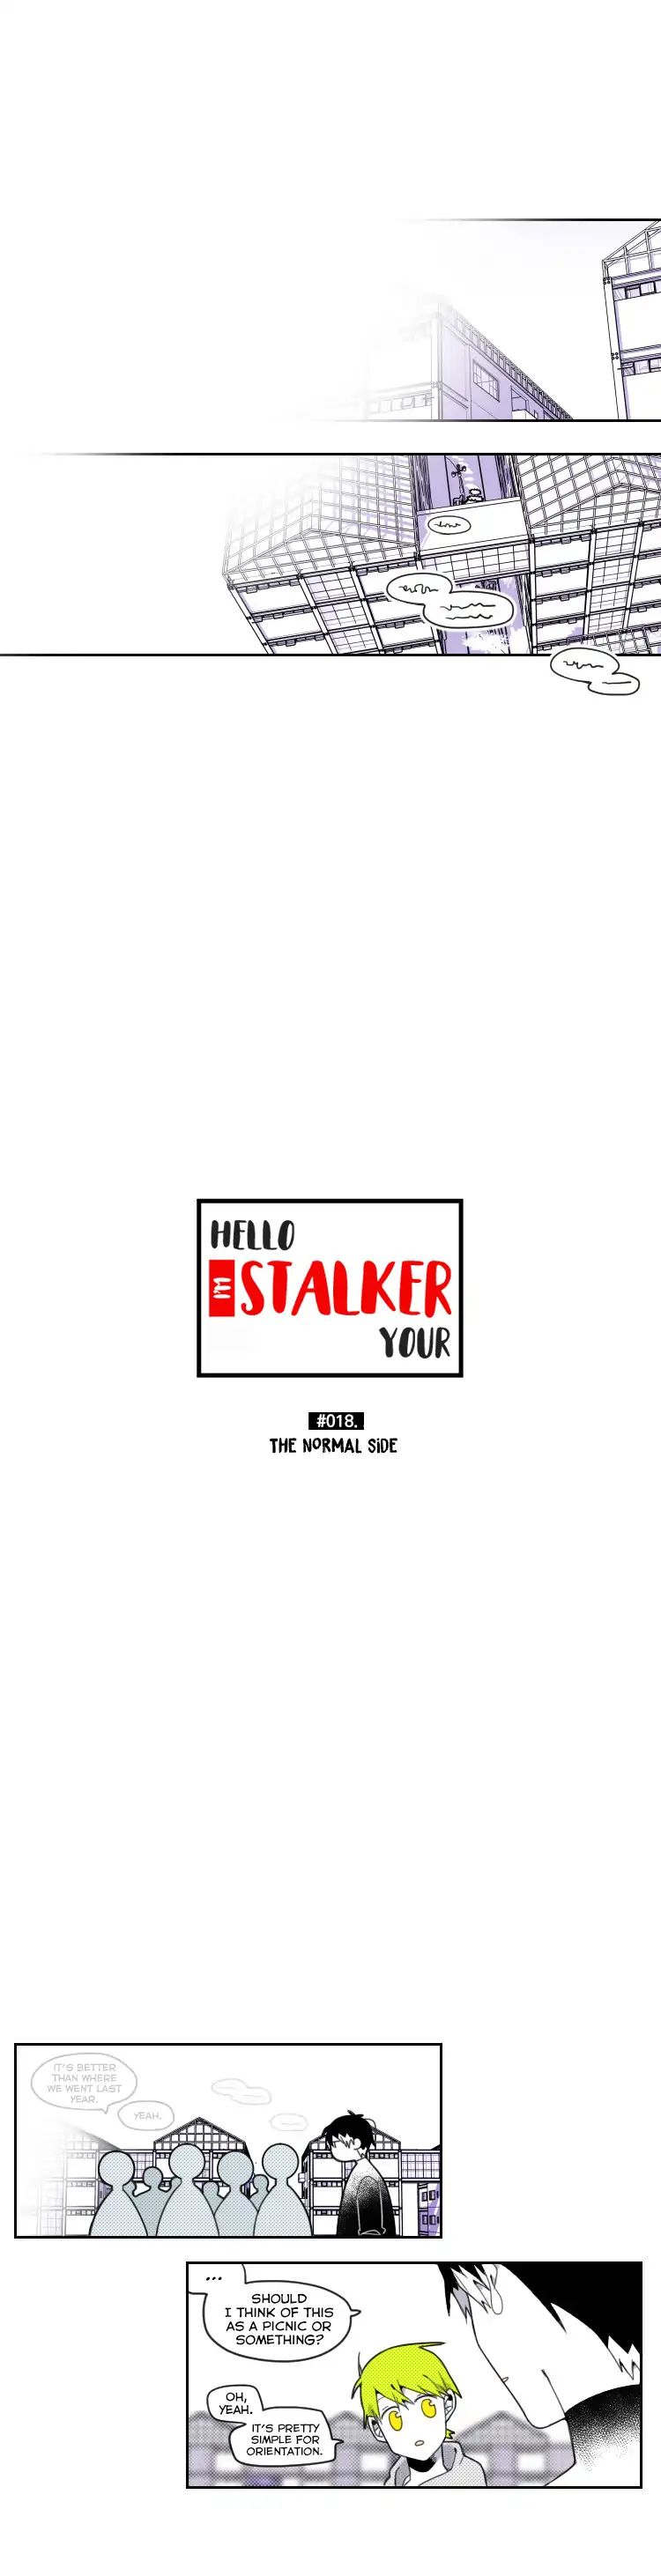 Hello, I'm Your Stalker - chapter 18 - #1